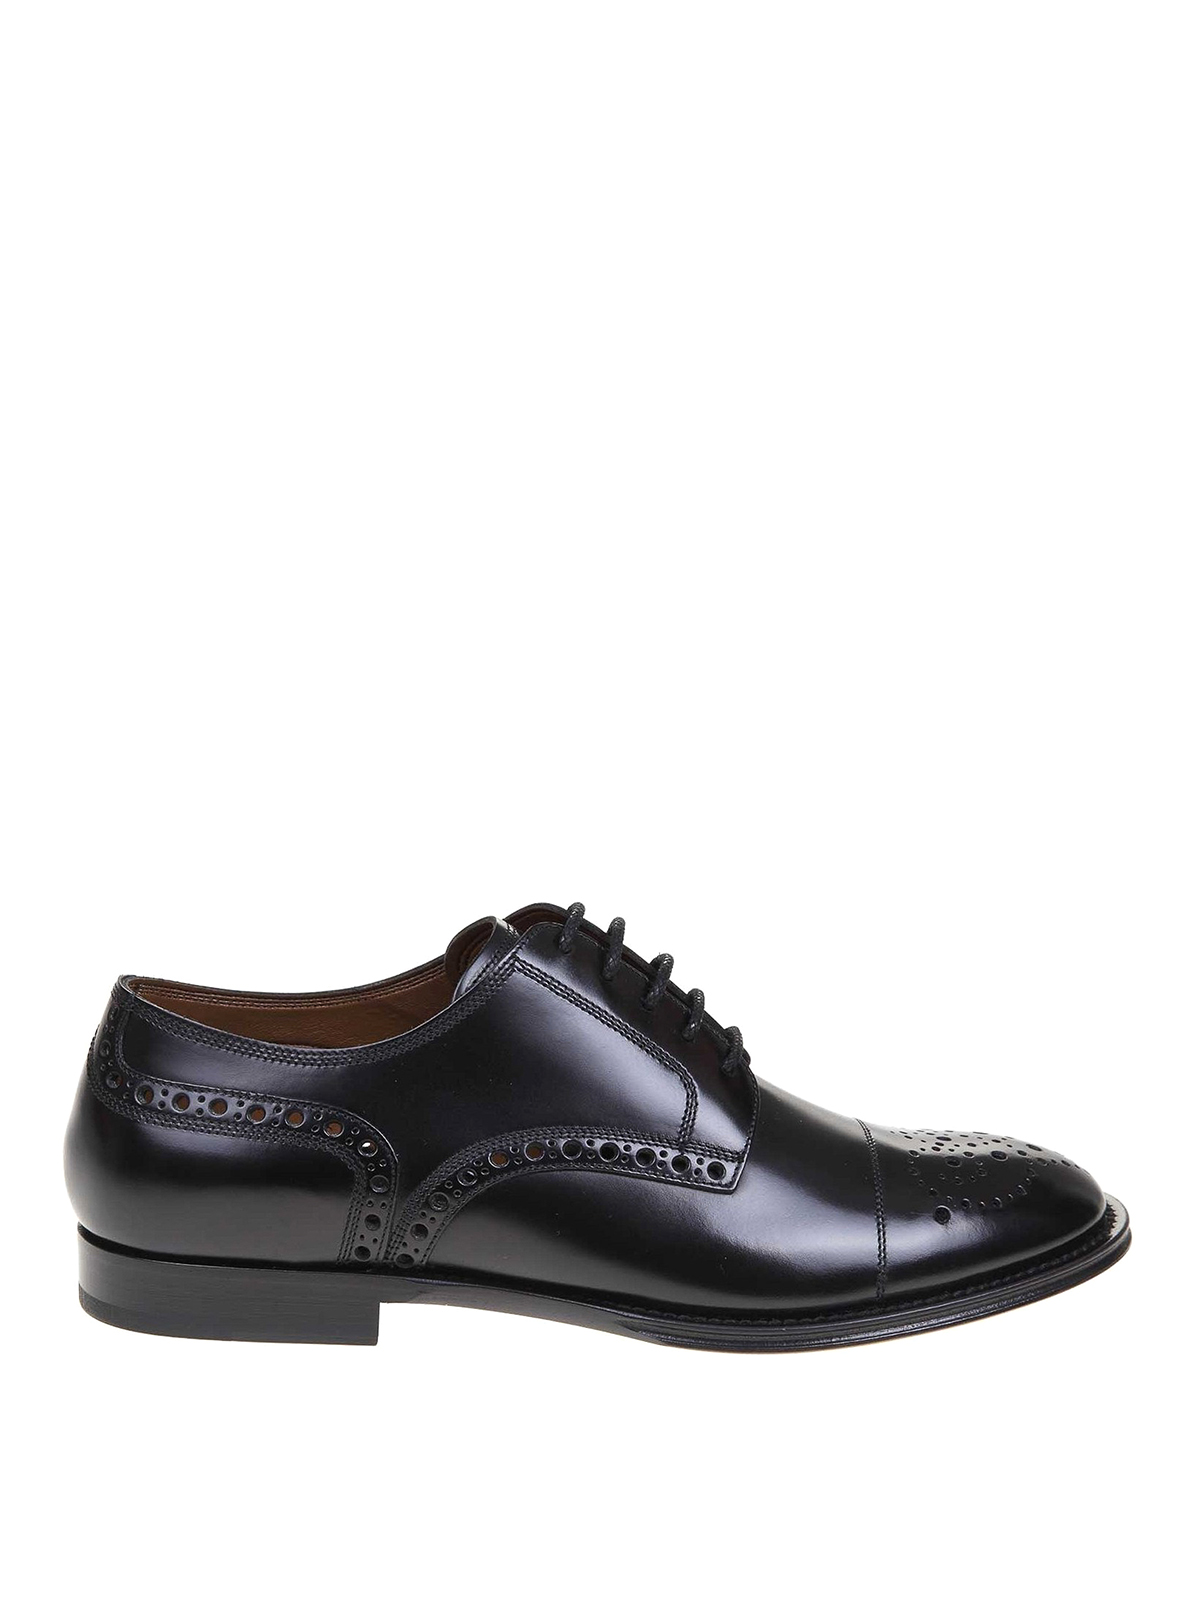 Classic shoes Dolce & Gabbana - Leather Derby brogue shoes ...